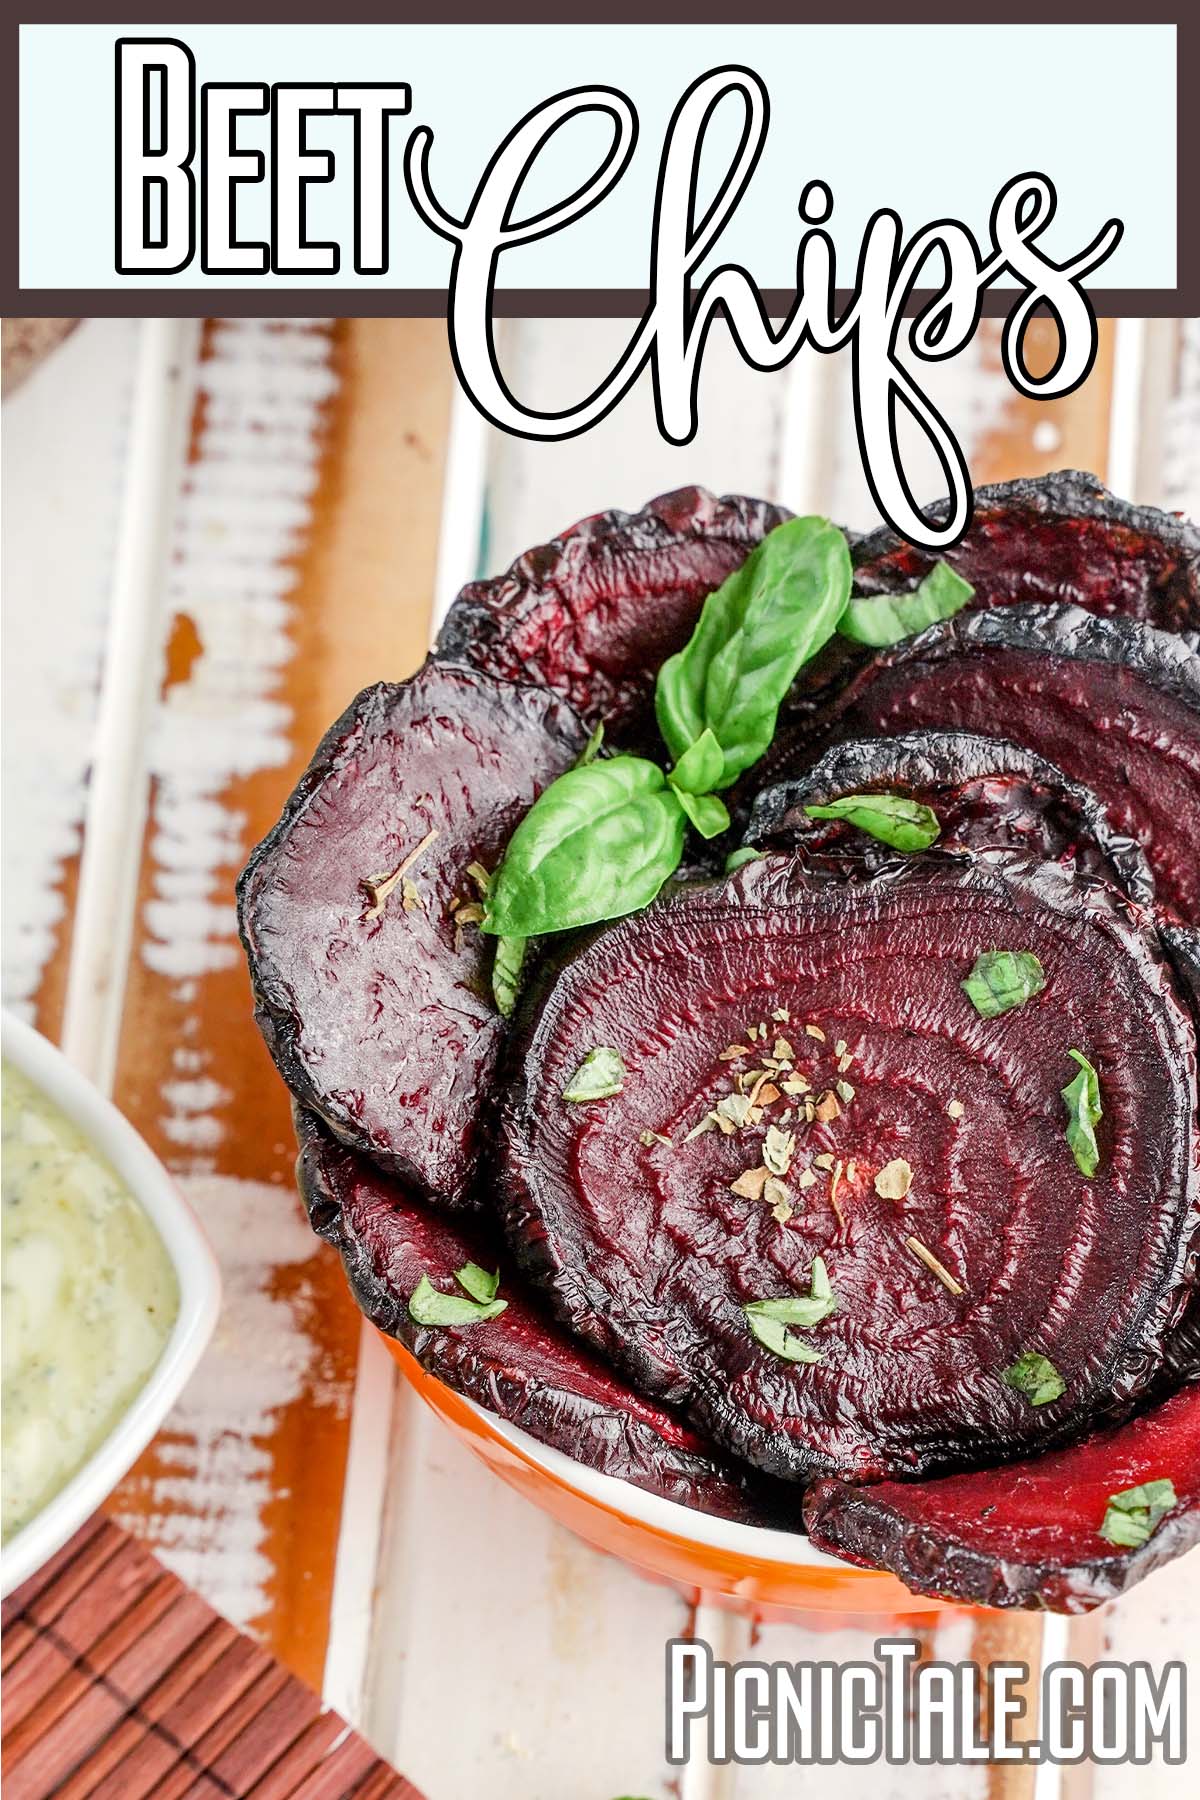 potato chip alternative recipe with text which reads Beet Chips